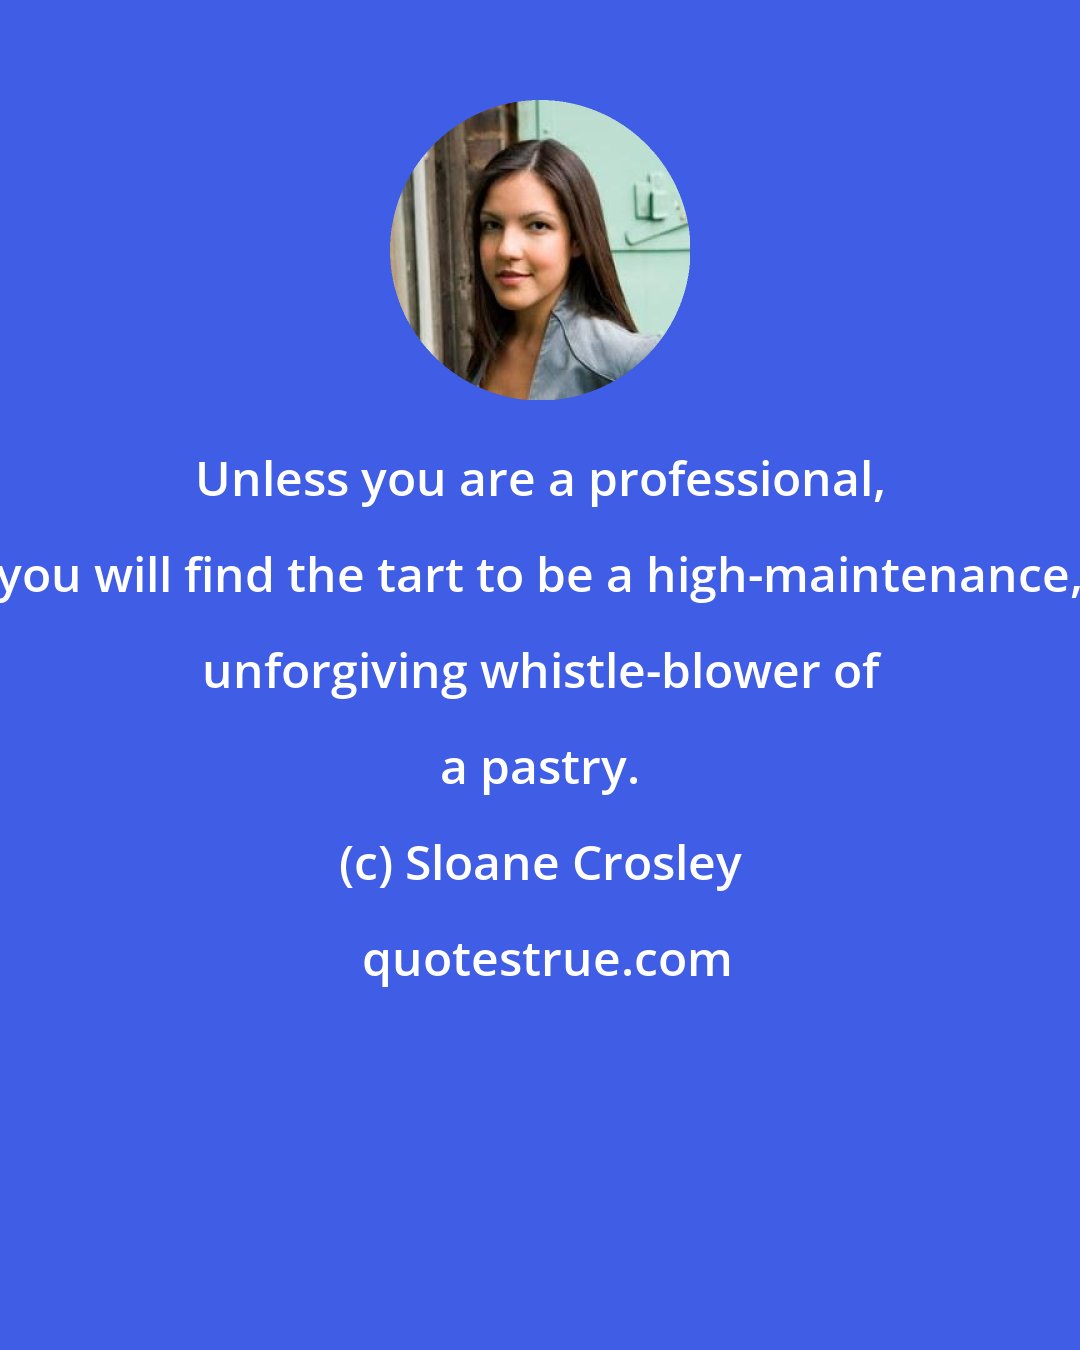 Sloane Crosley: Unless you are a professional, you will find the tart to be a high-maintenance, unforgiving whistle-blower of a pastry.